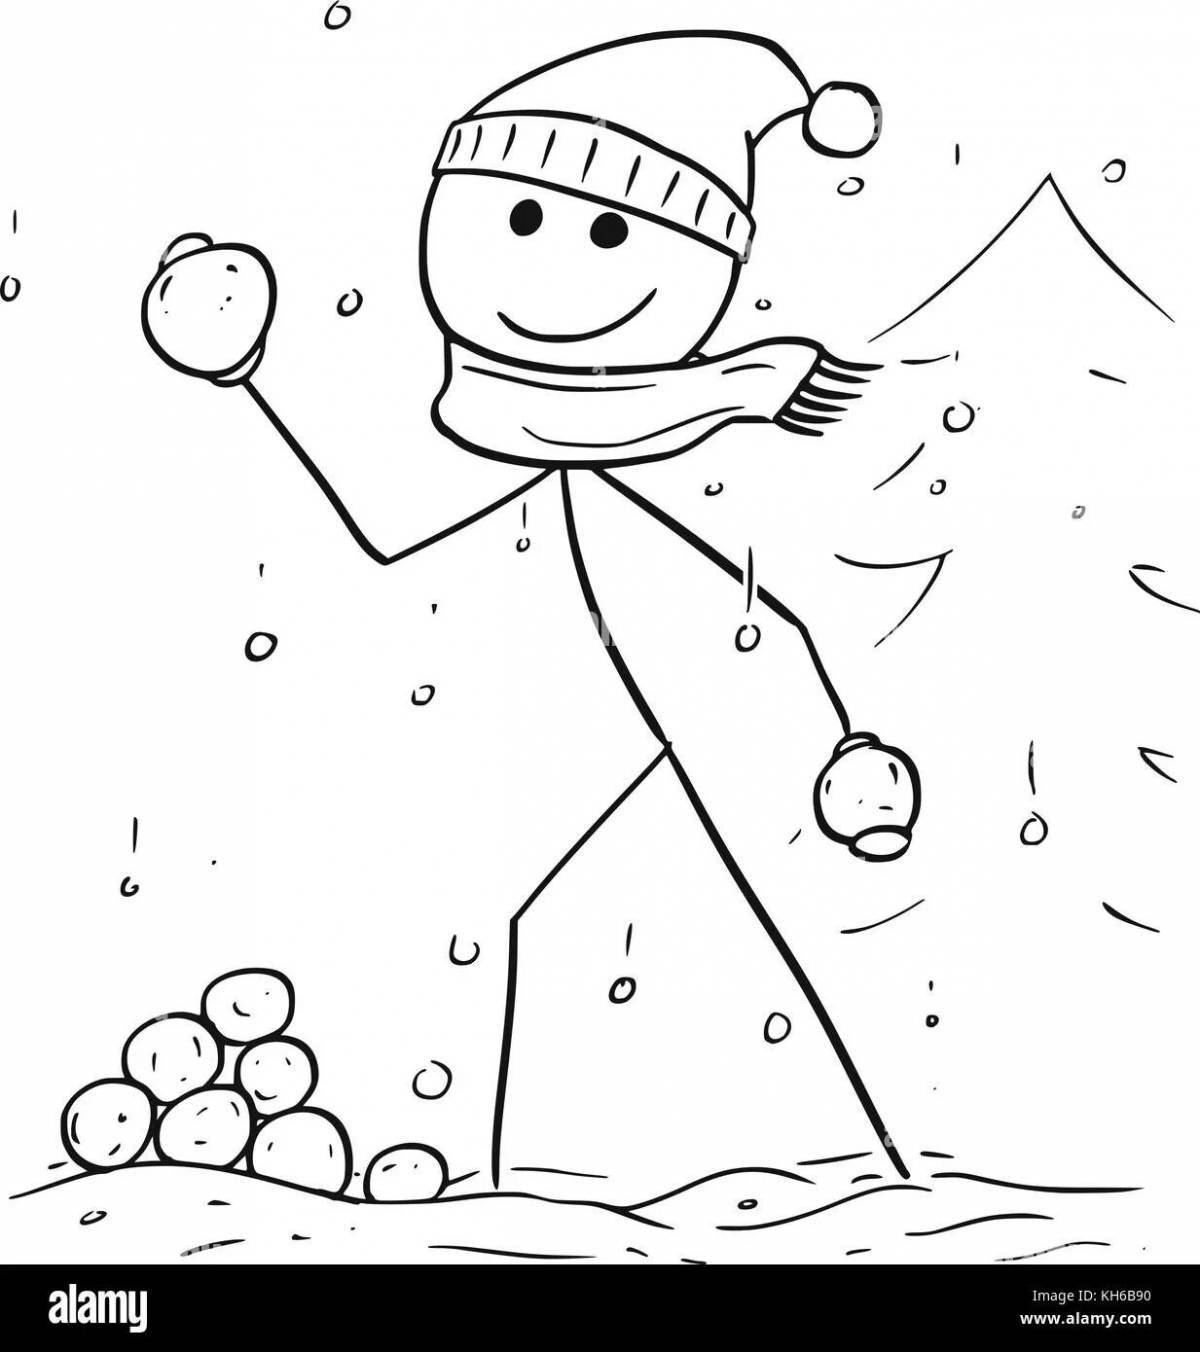 Cute snowball coloring book for kids